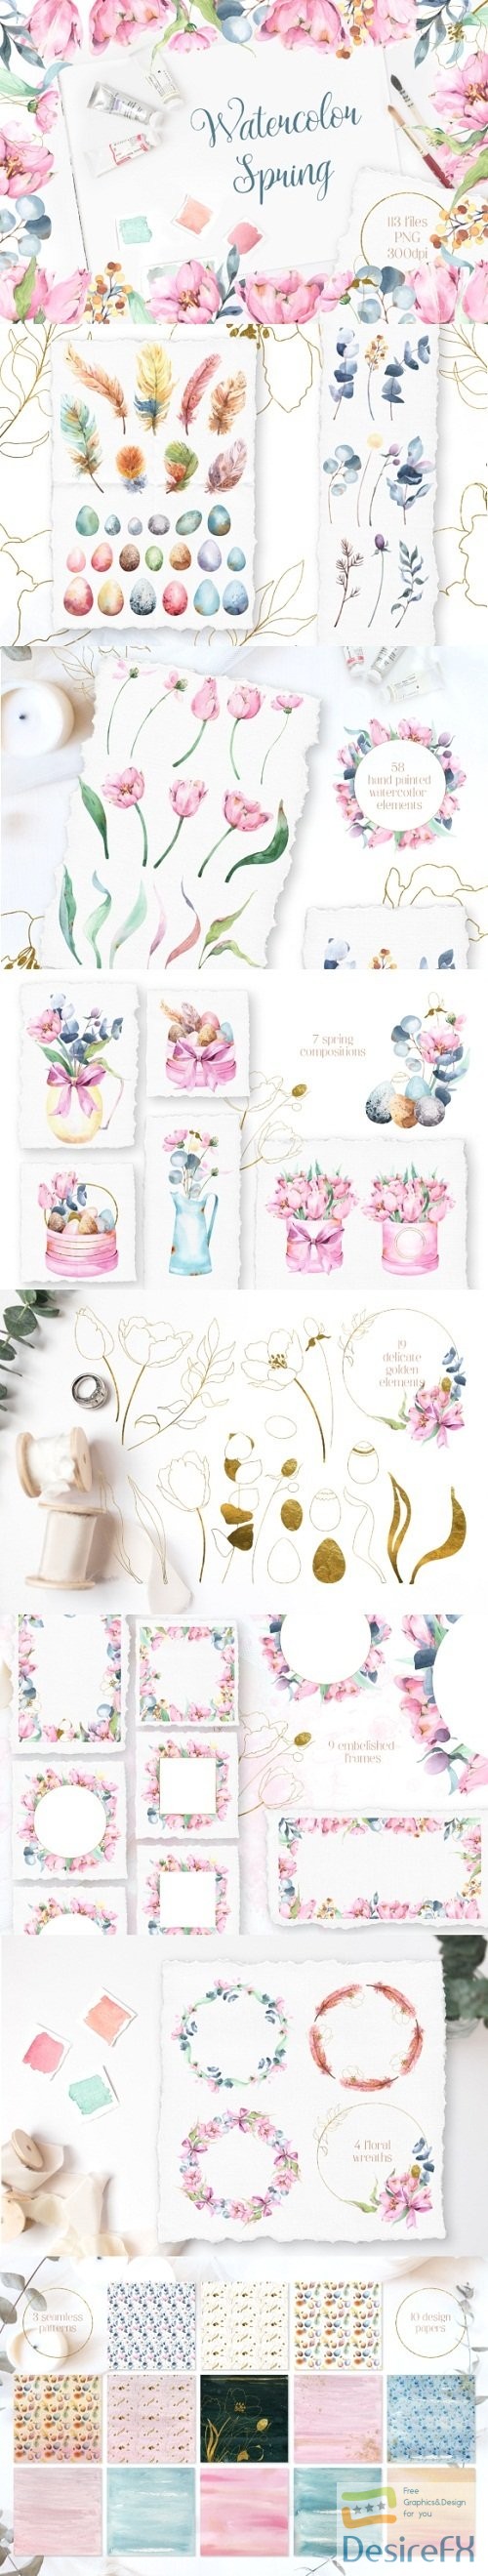 Download Watercolor Spring floral collection - DesireFX.COM